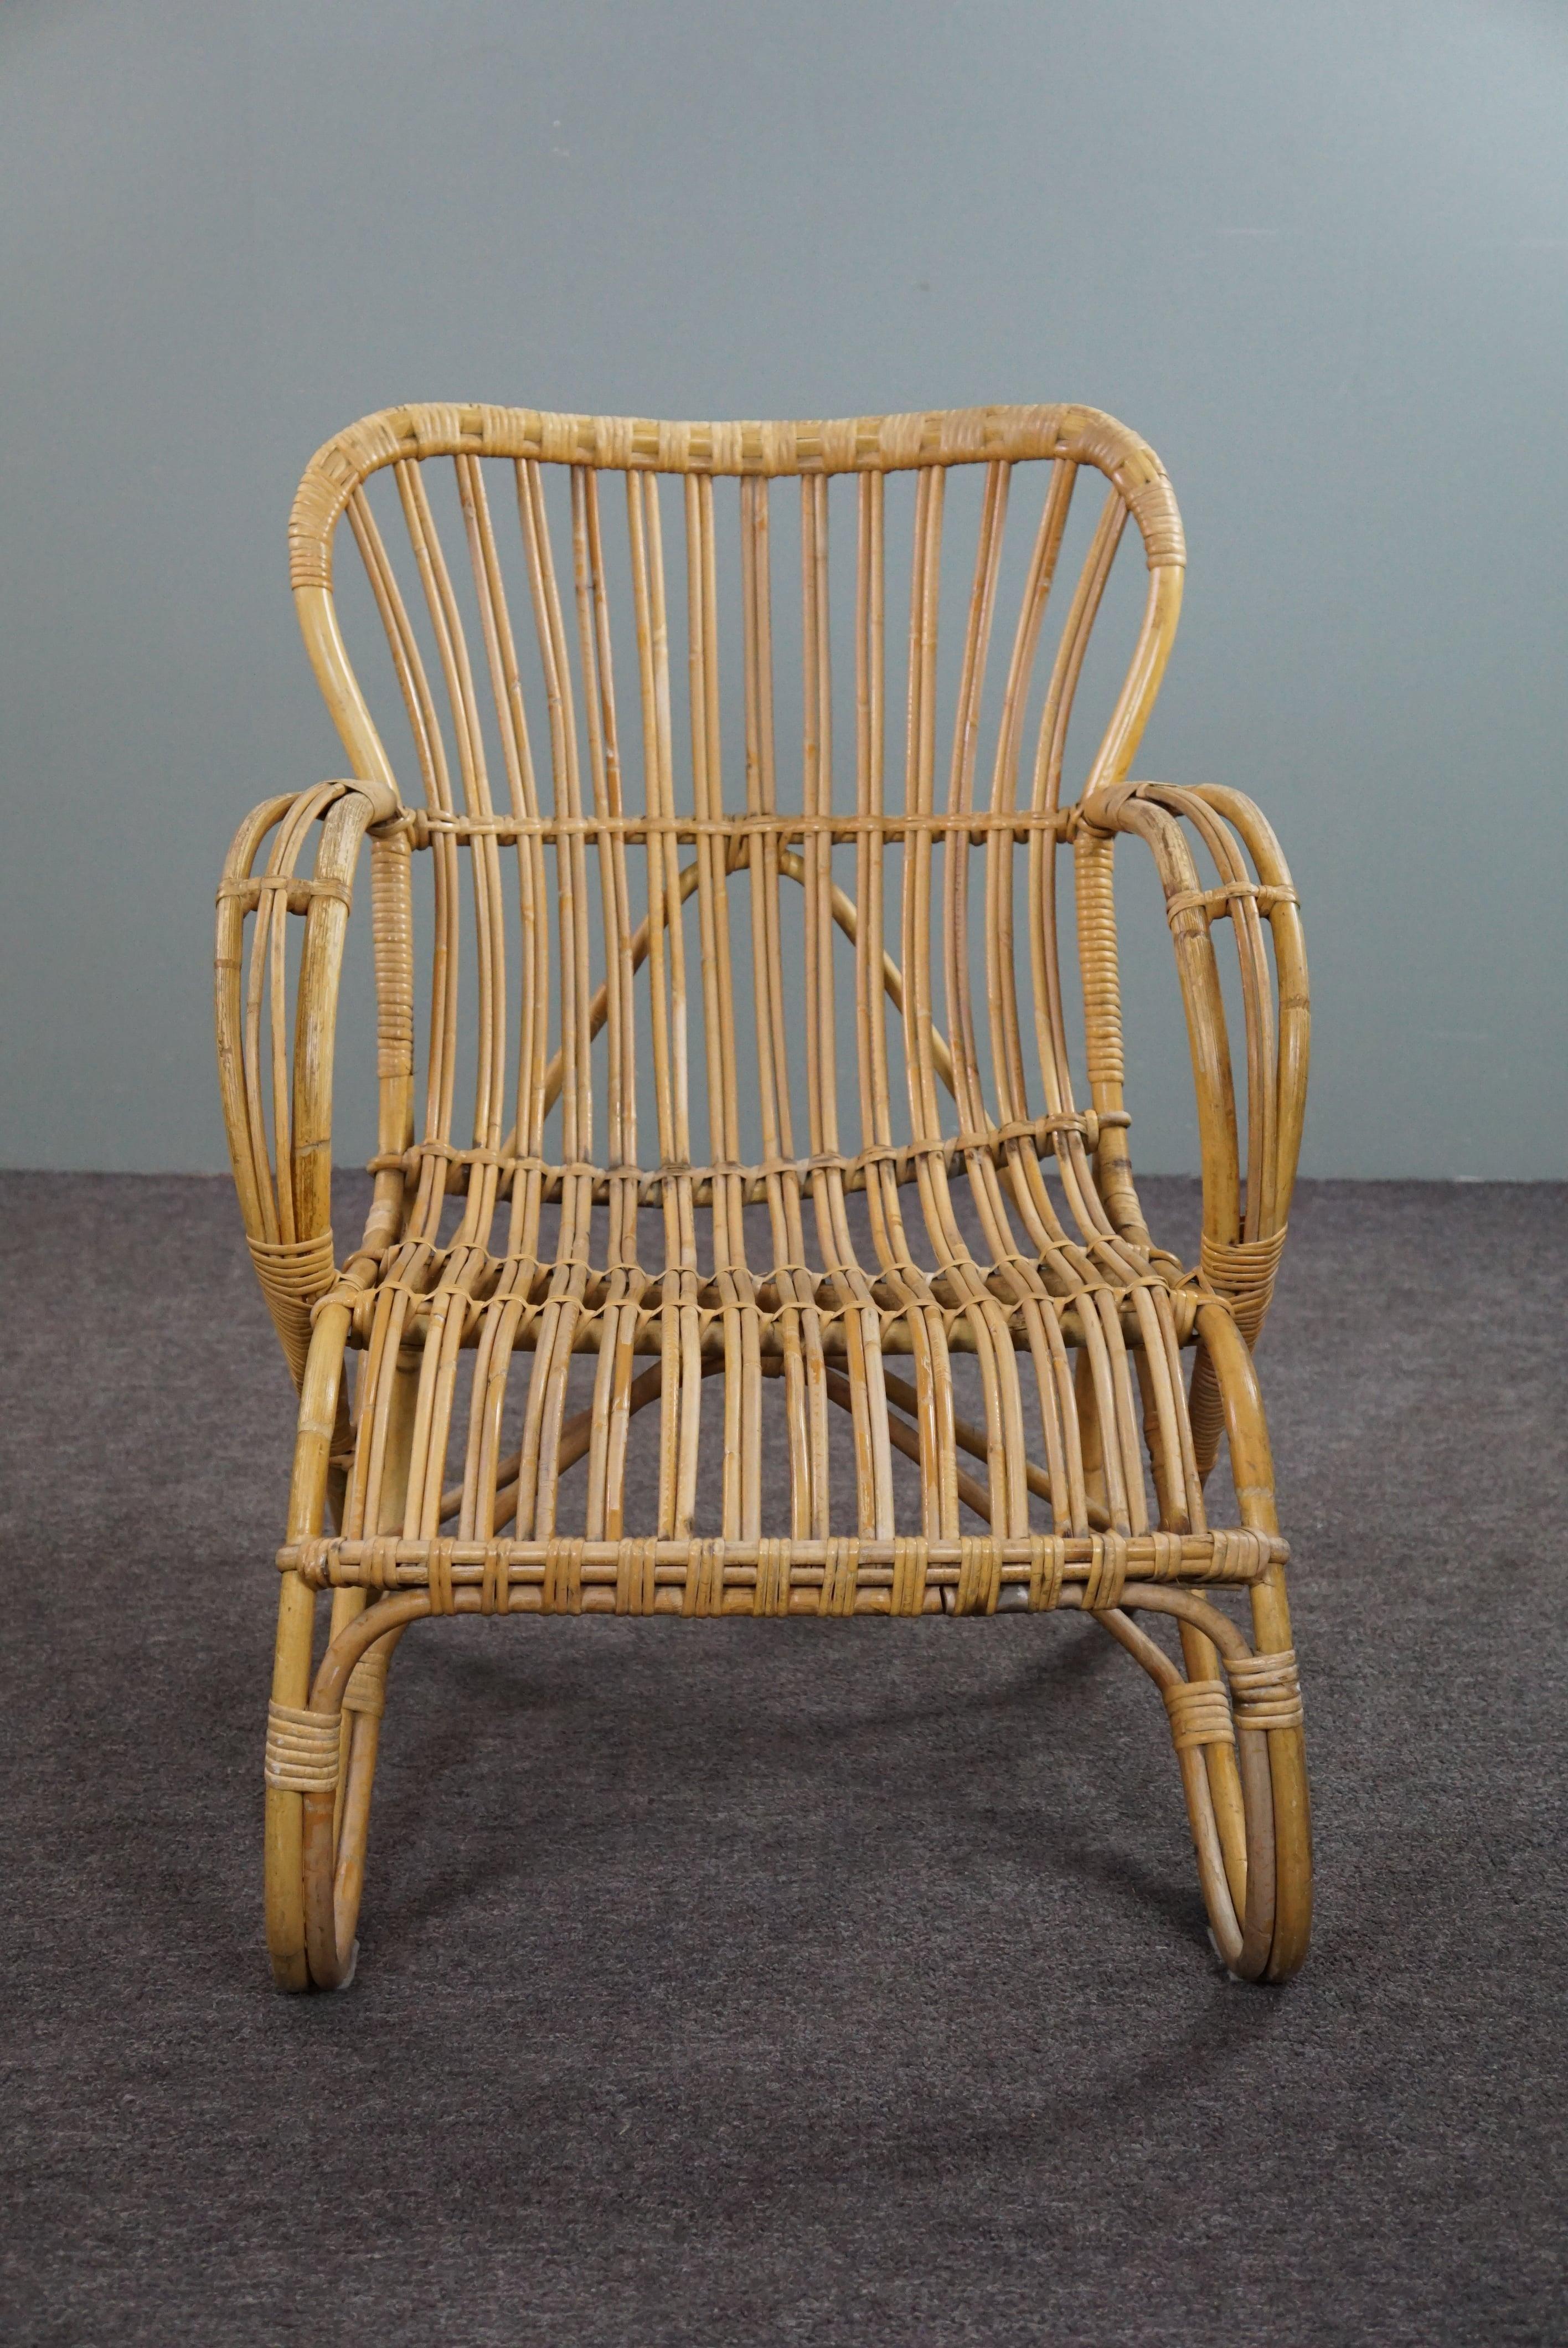 Offered is this unique and very beautifully designed Dutch Design armchair made in the 1950s in the Netherlands.

This rattan Belse 8 armchair has a timeless design, a beautifully shaped and ergonomic back and beautiful curved details. The armrests